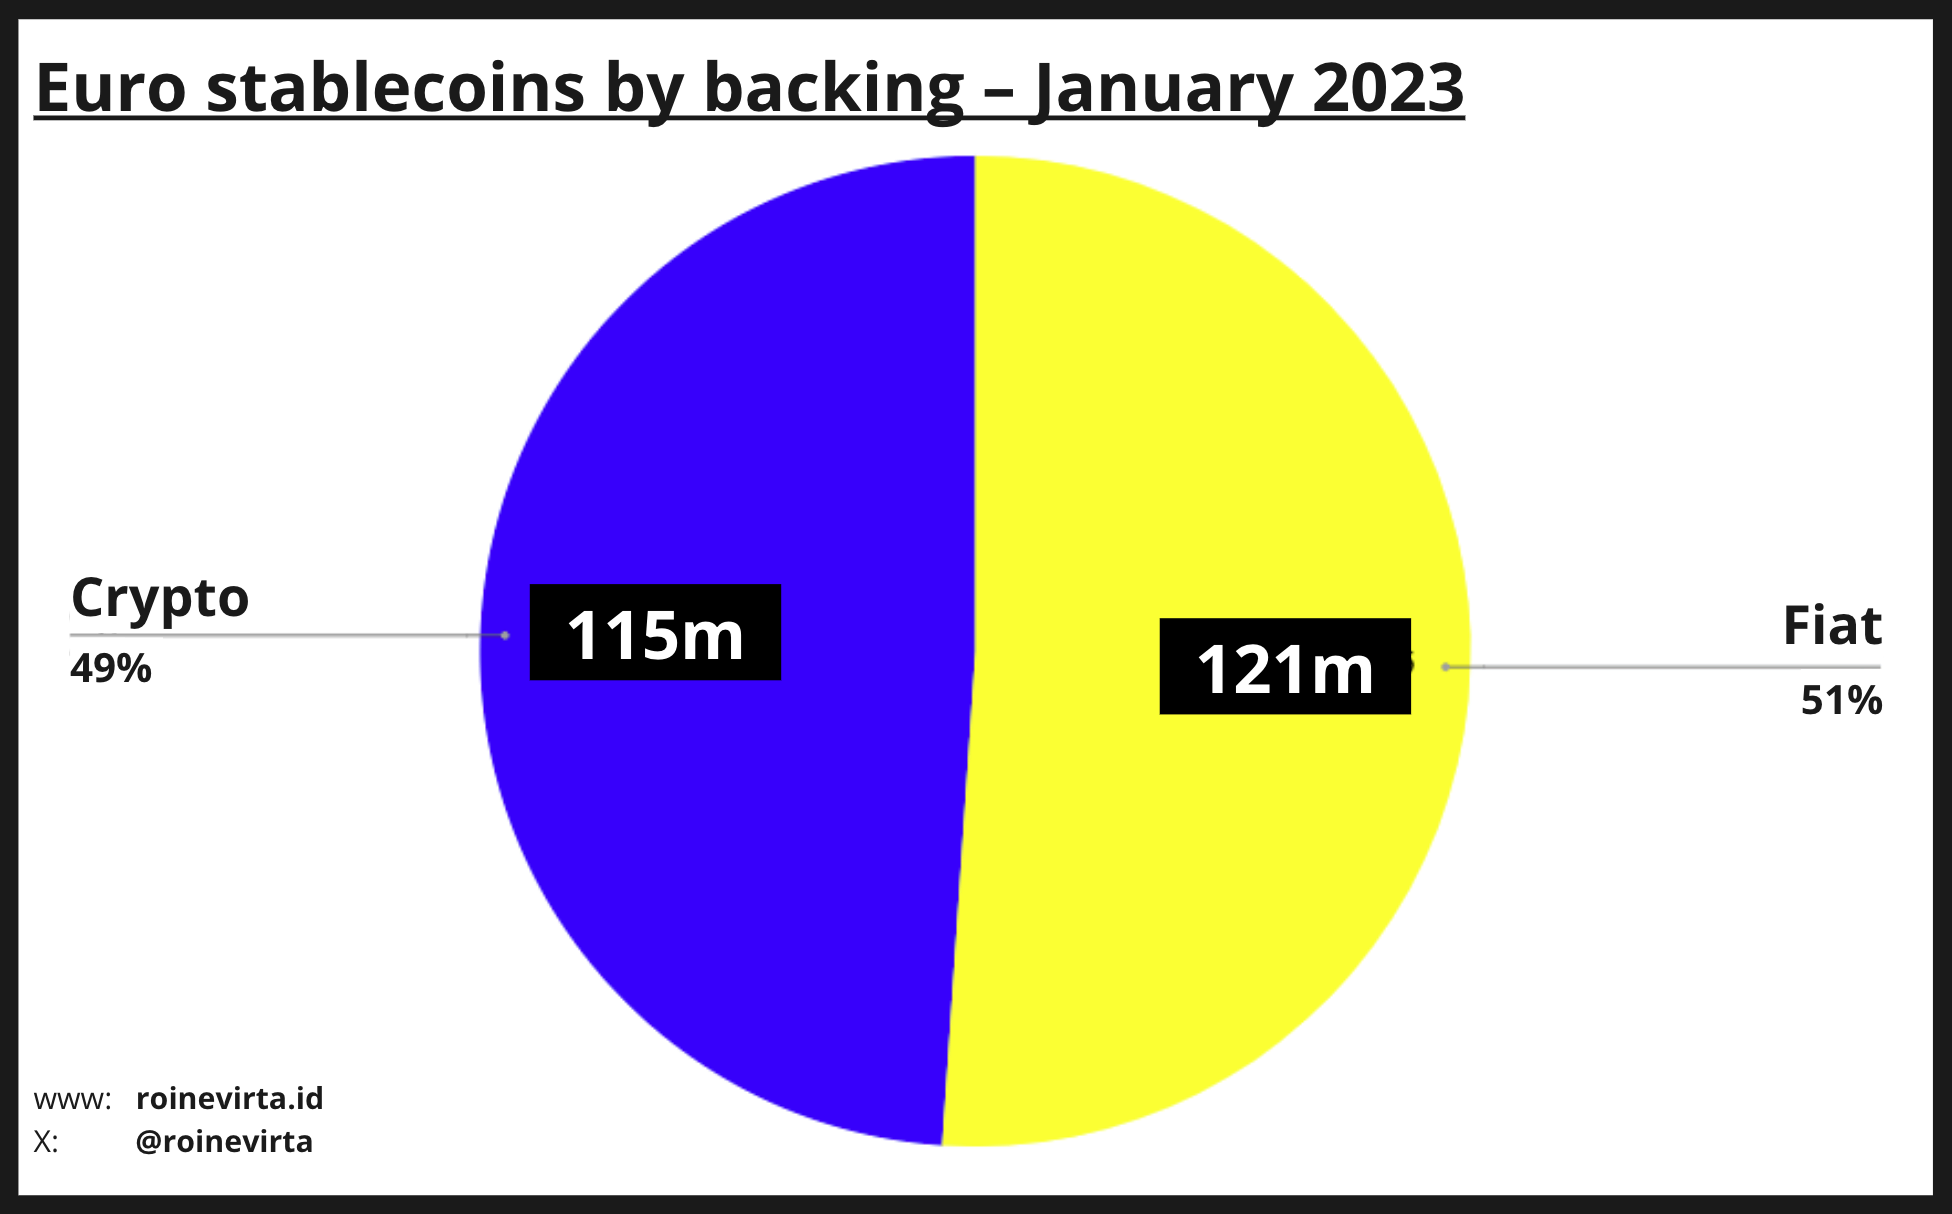 Figure 3: Euro stablecoins by backing in January